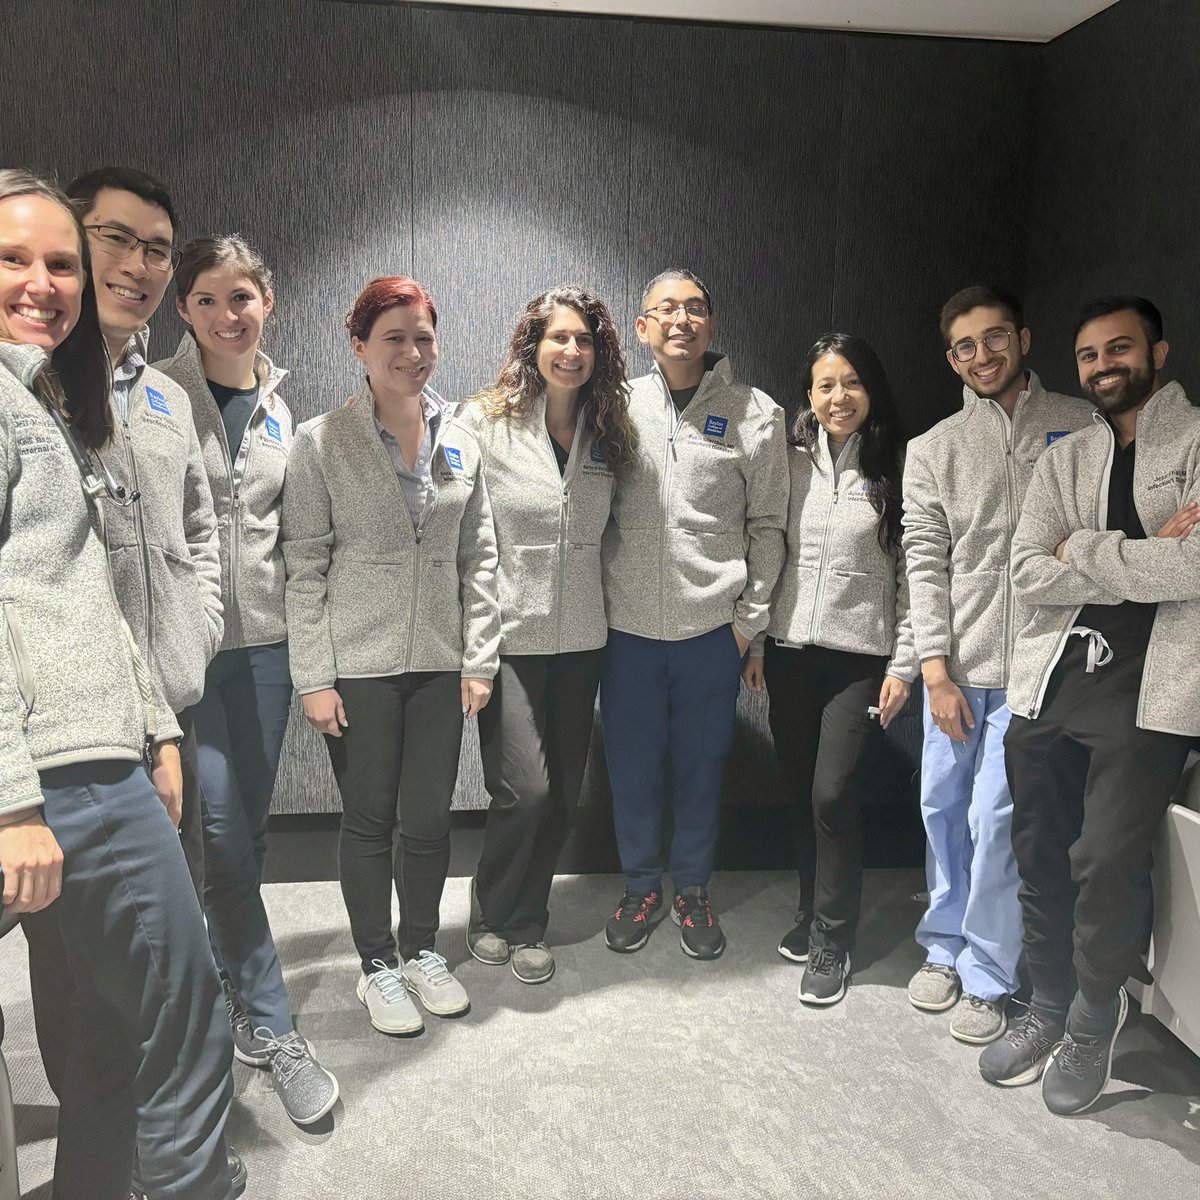 New @BCMIDFellowship jackets have arrived! A huge thank you to our program for getting these for the fellows! @PrathitKulkarni @MelanieGoebelMD